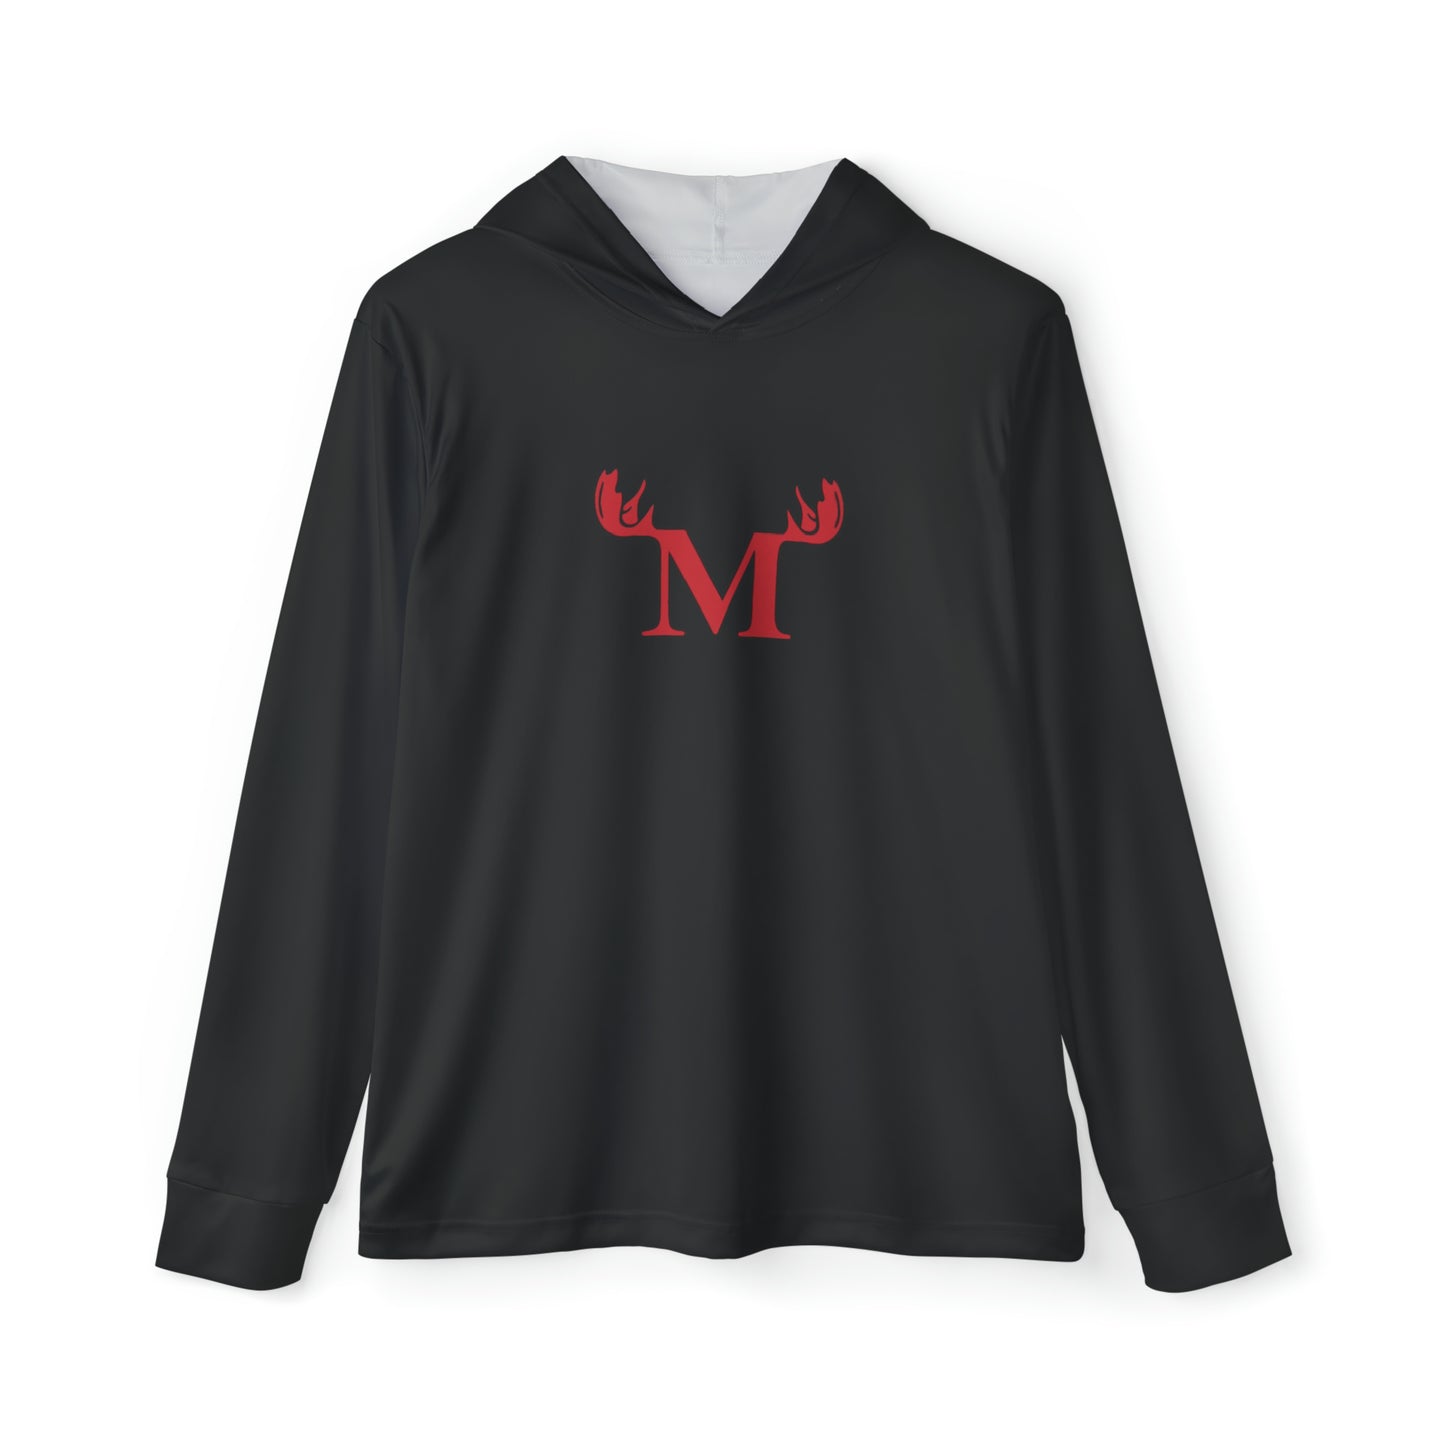 The "M" Warm Up Hoodie UPF 50+ Sun Protection